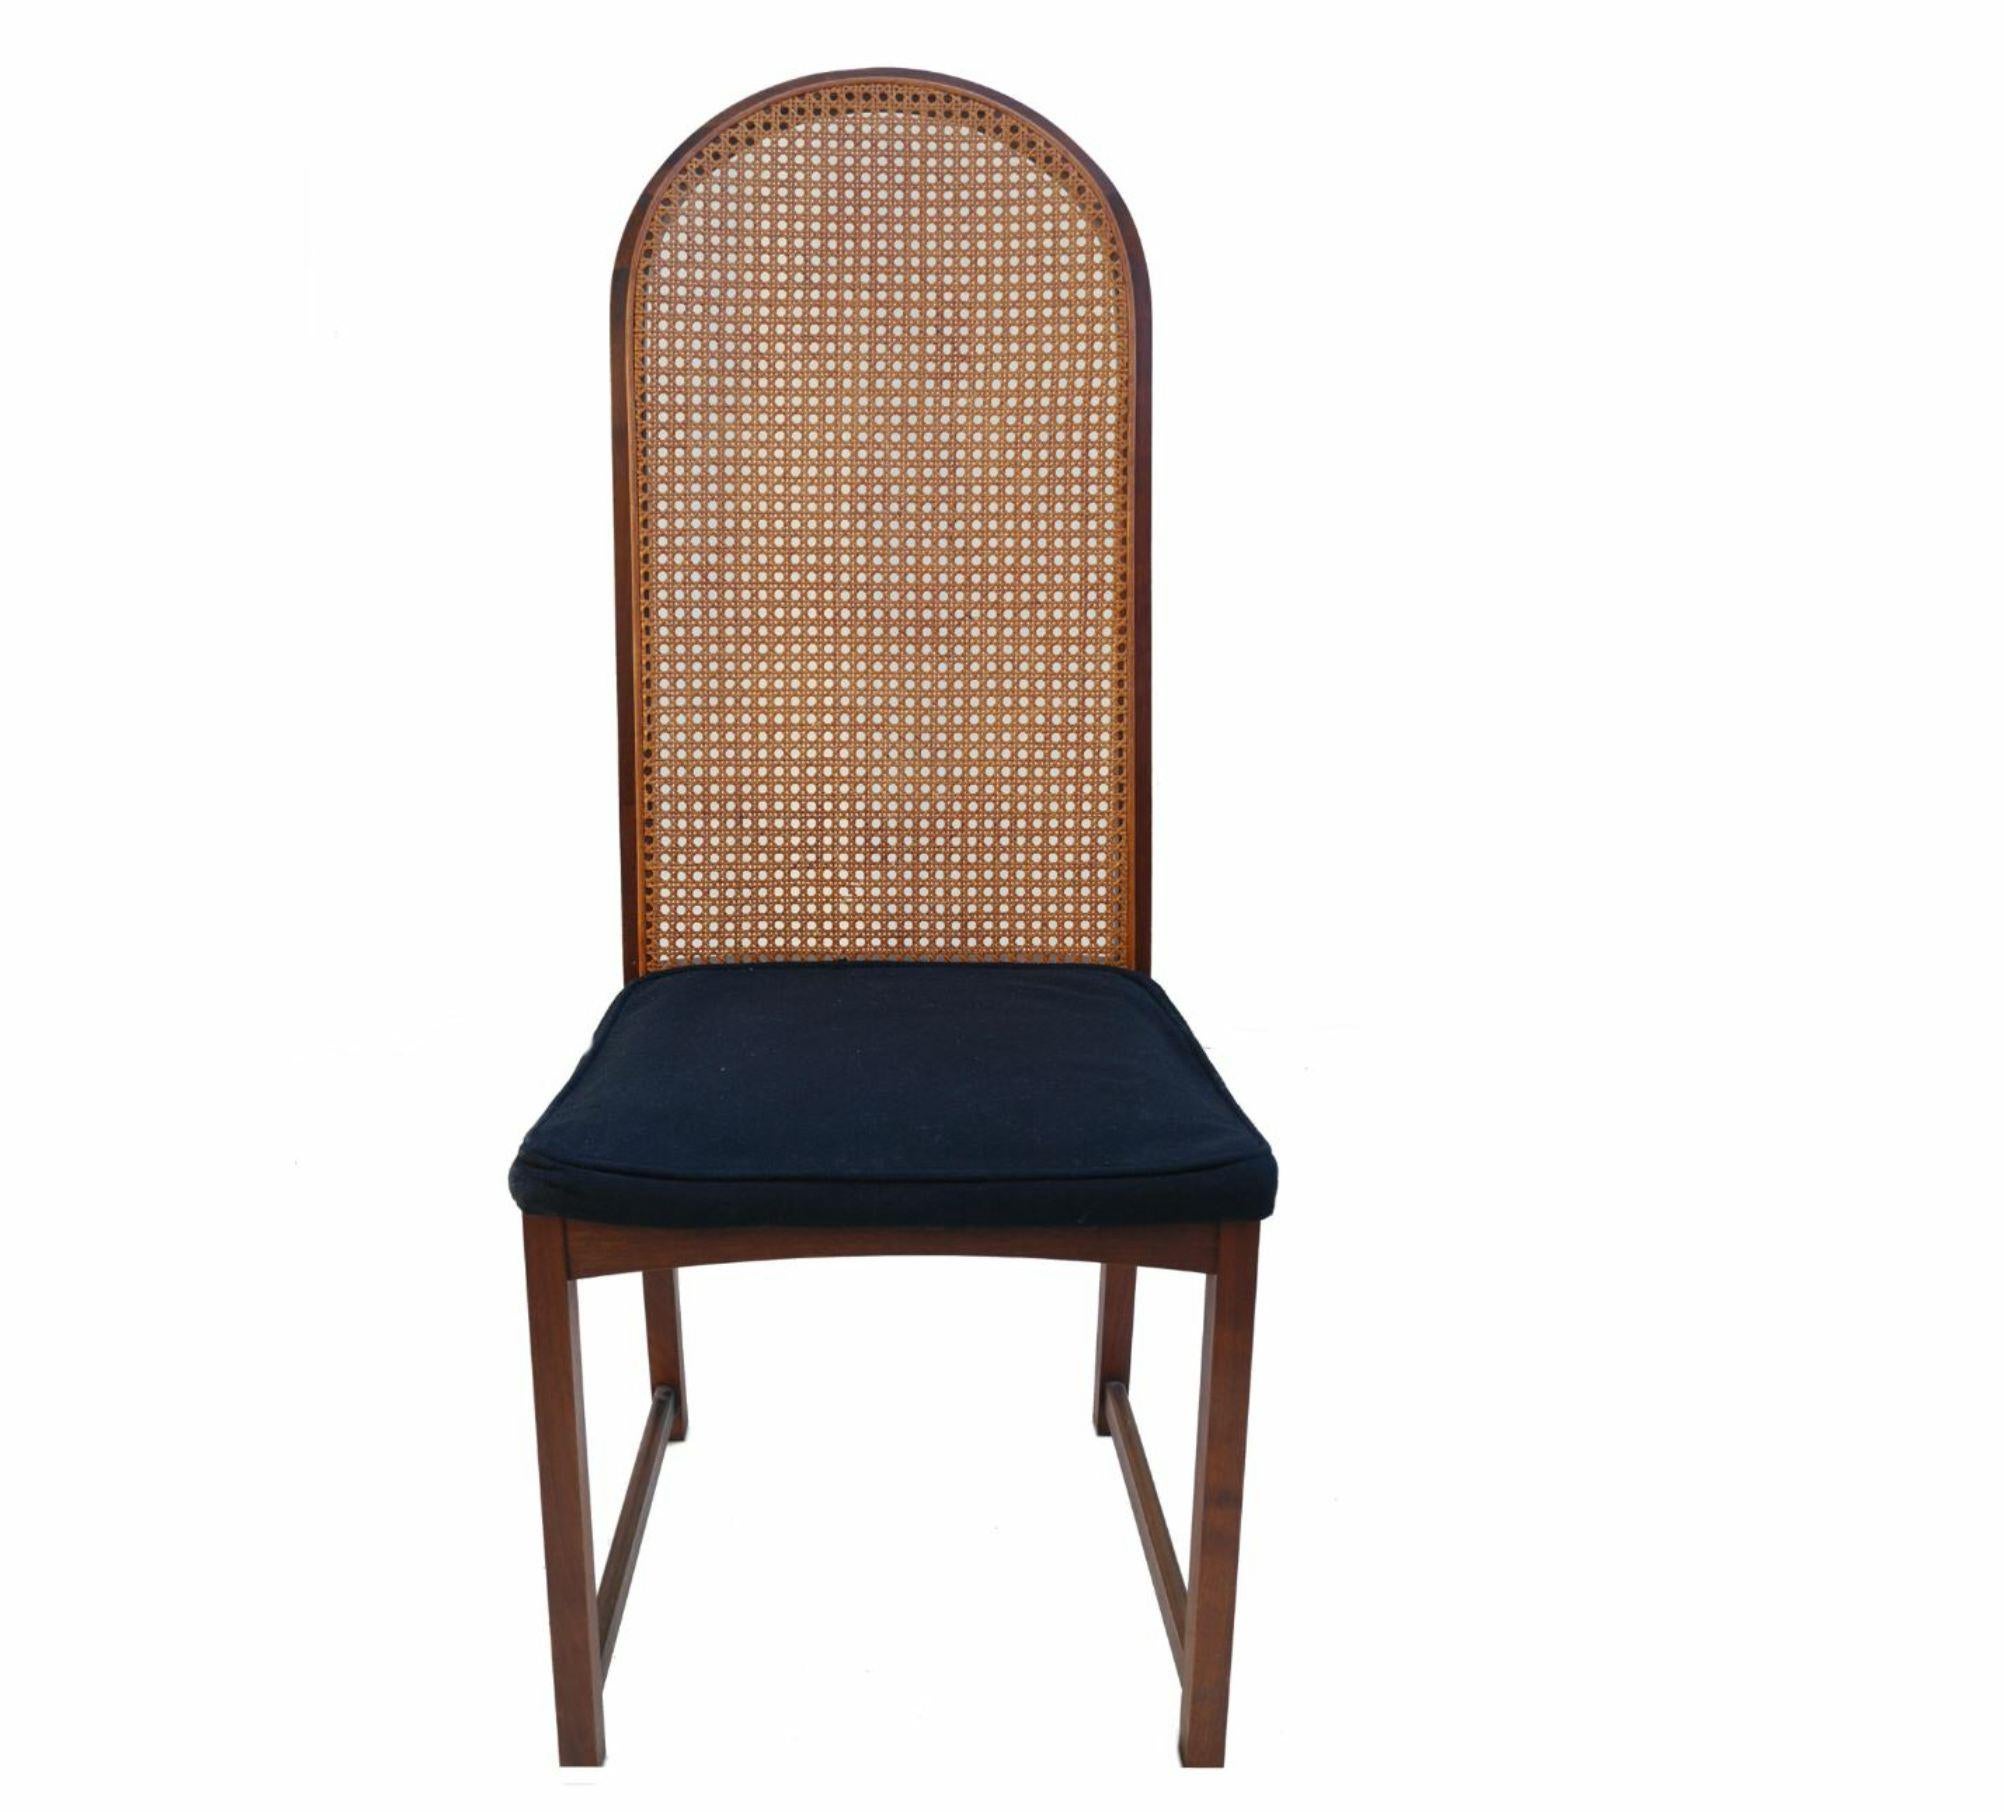 curved cane chair